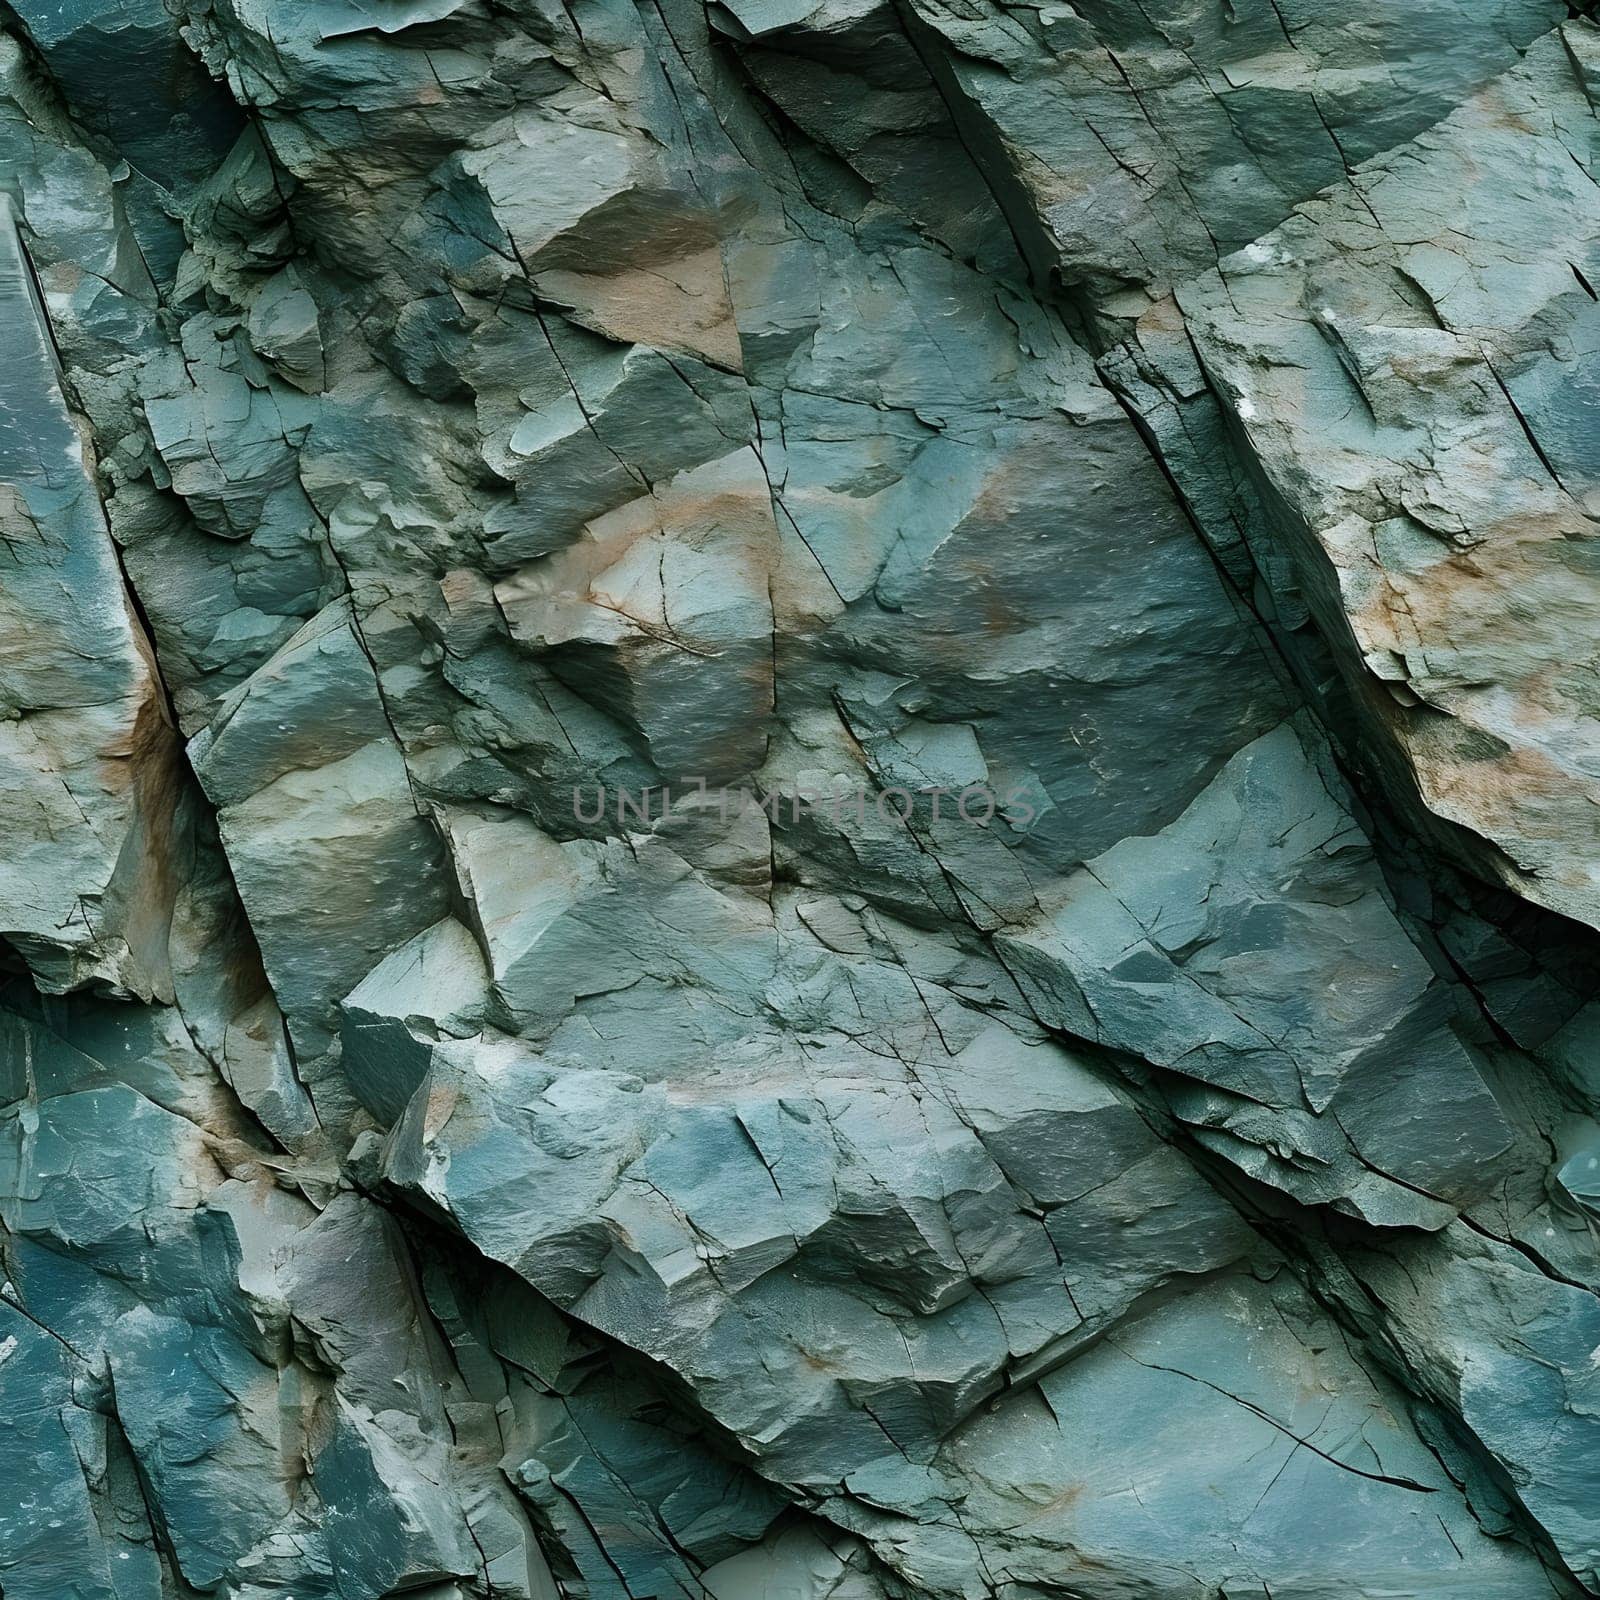 Seamless texture of stone wall, rocky cliff. Rough mountain surface. Close-up. Neural network generated image. Not based on any actual scene or pattern.